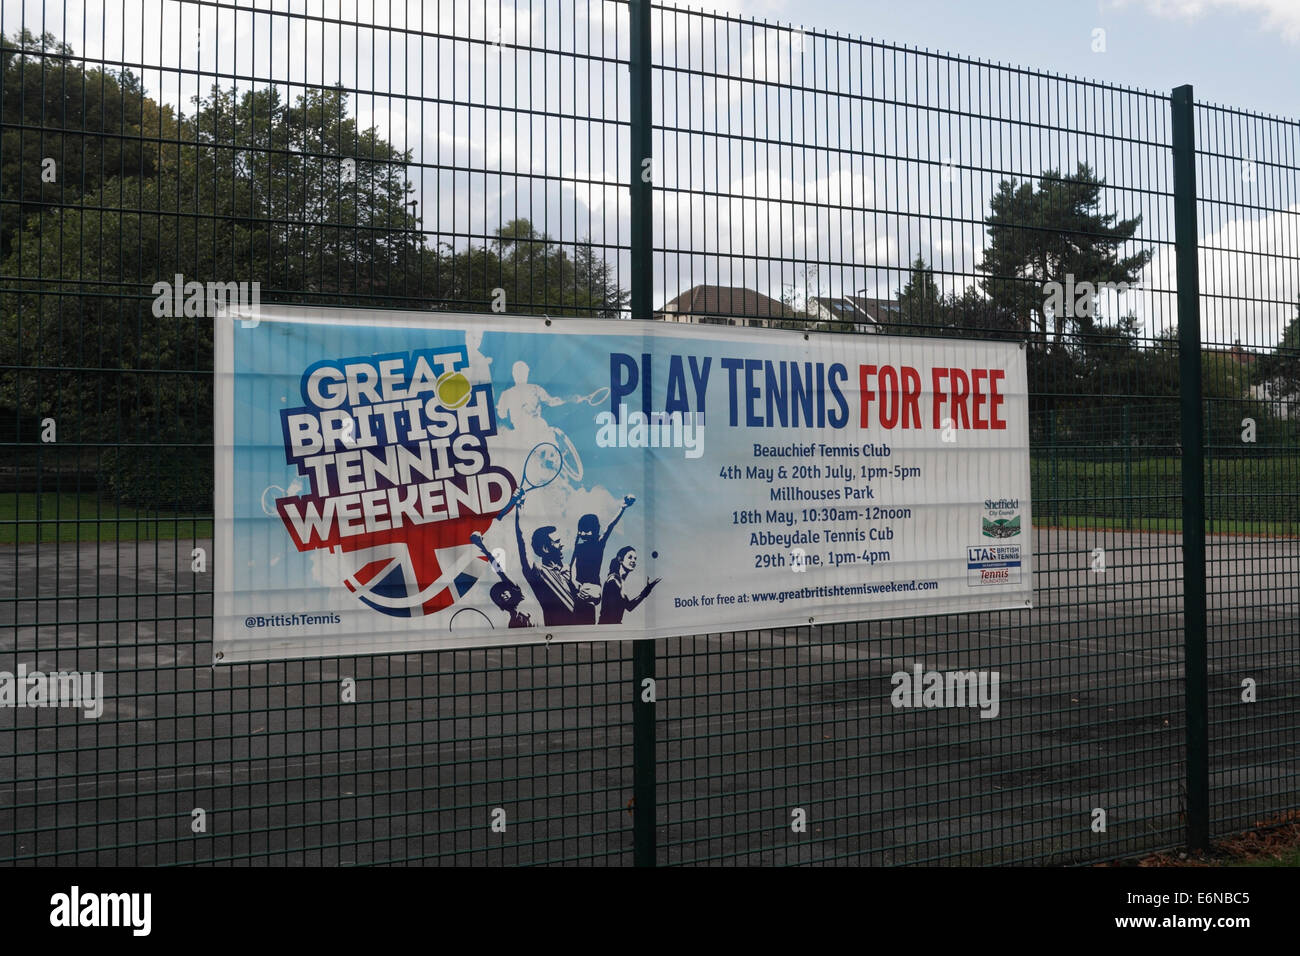 Great British Tennis Weekend, Play Tennis For Free Stock Photo